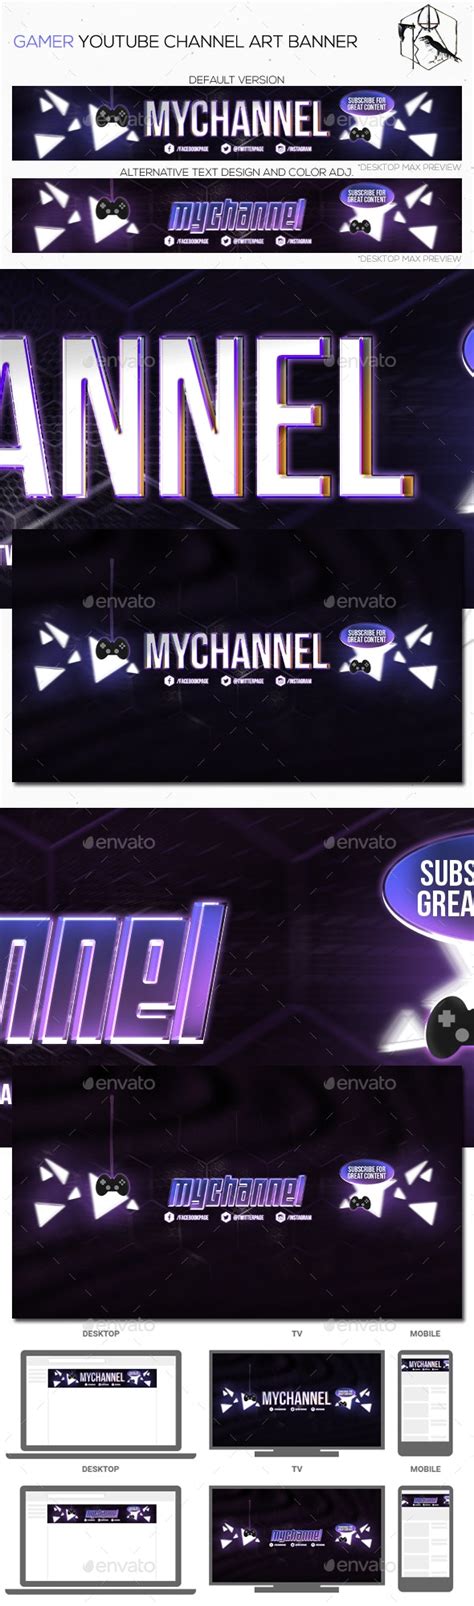 Gamer Youtube Channel Art By Russgfx Graphicriver